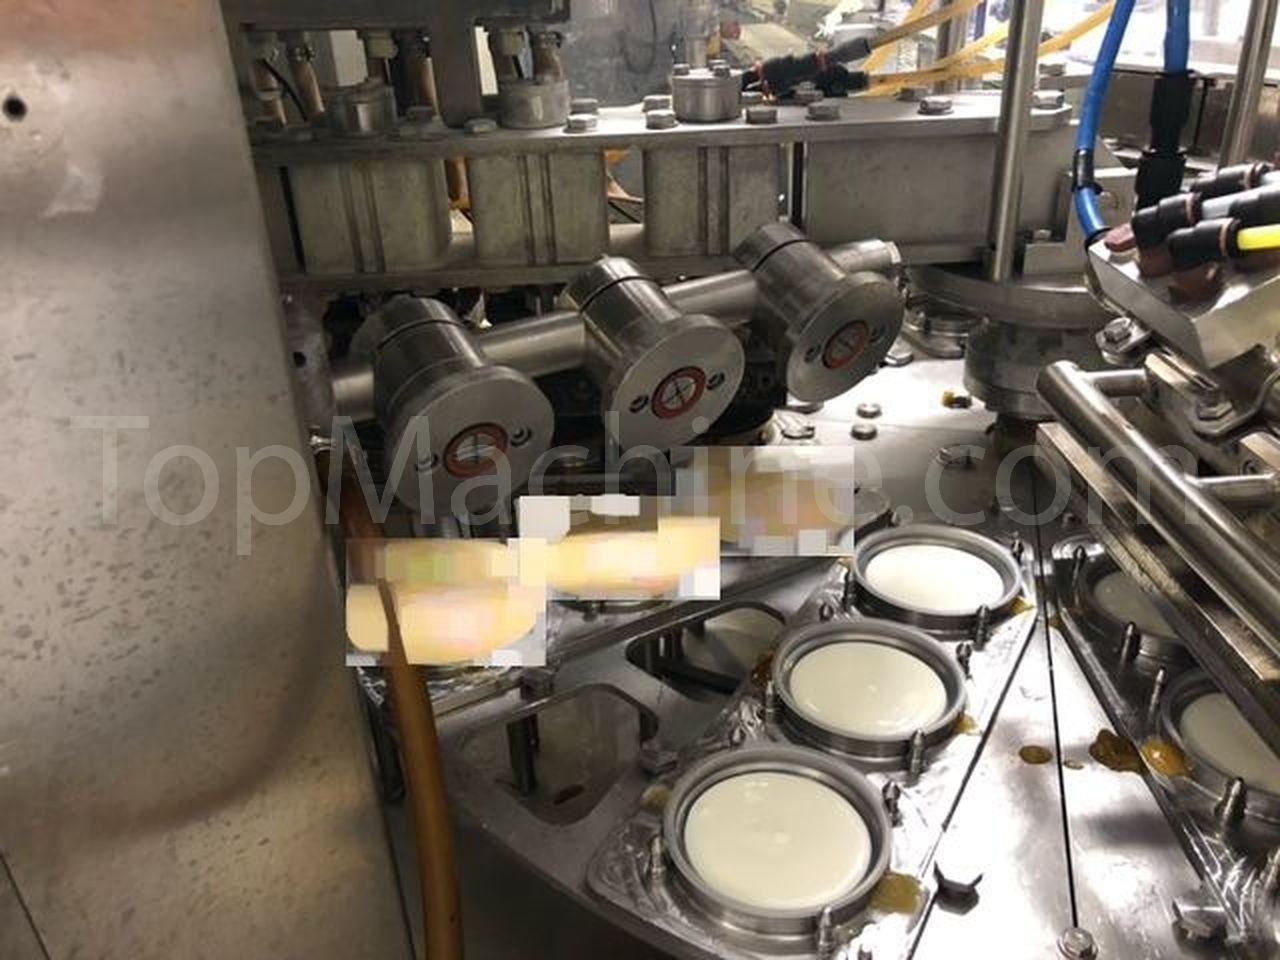 Used Waldner Dosomat 7.3 Dairy & Juices Cup Fill & Seal